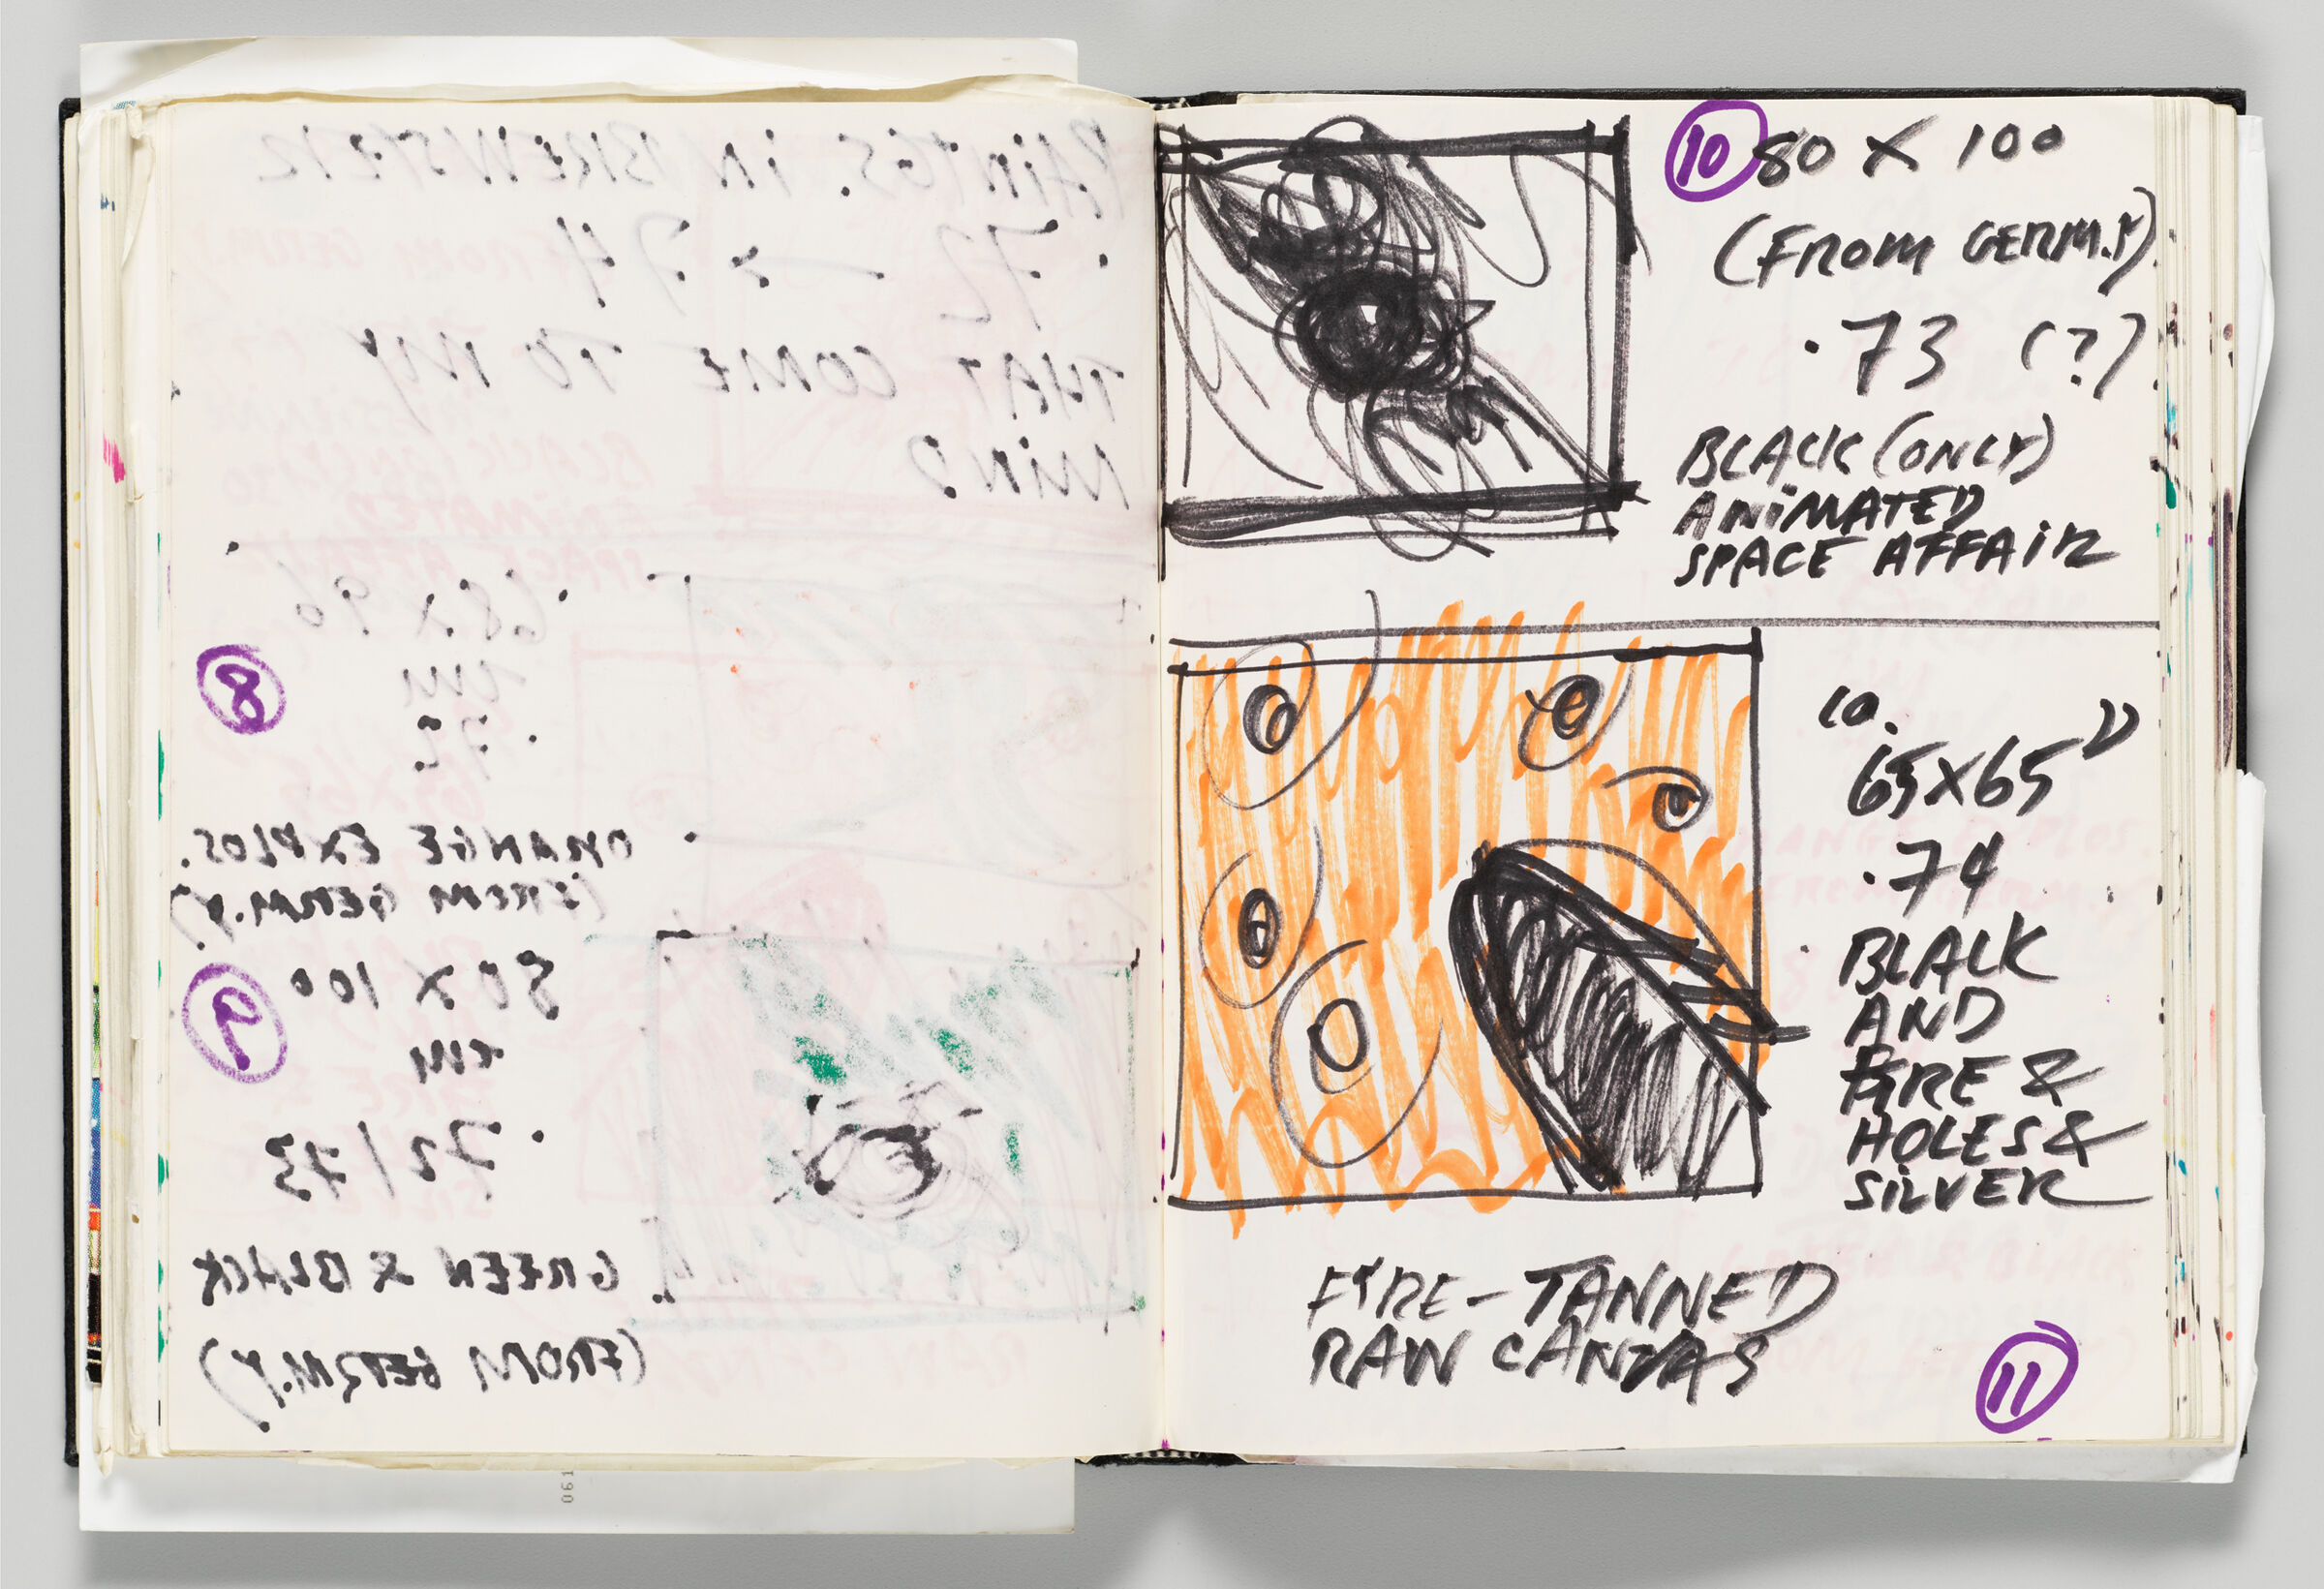 Untitled (Bleed-Through Of Previous Page And Color Transfer, Left Page); Untitled (Sketches Of Paintings For Show, Right Page)